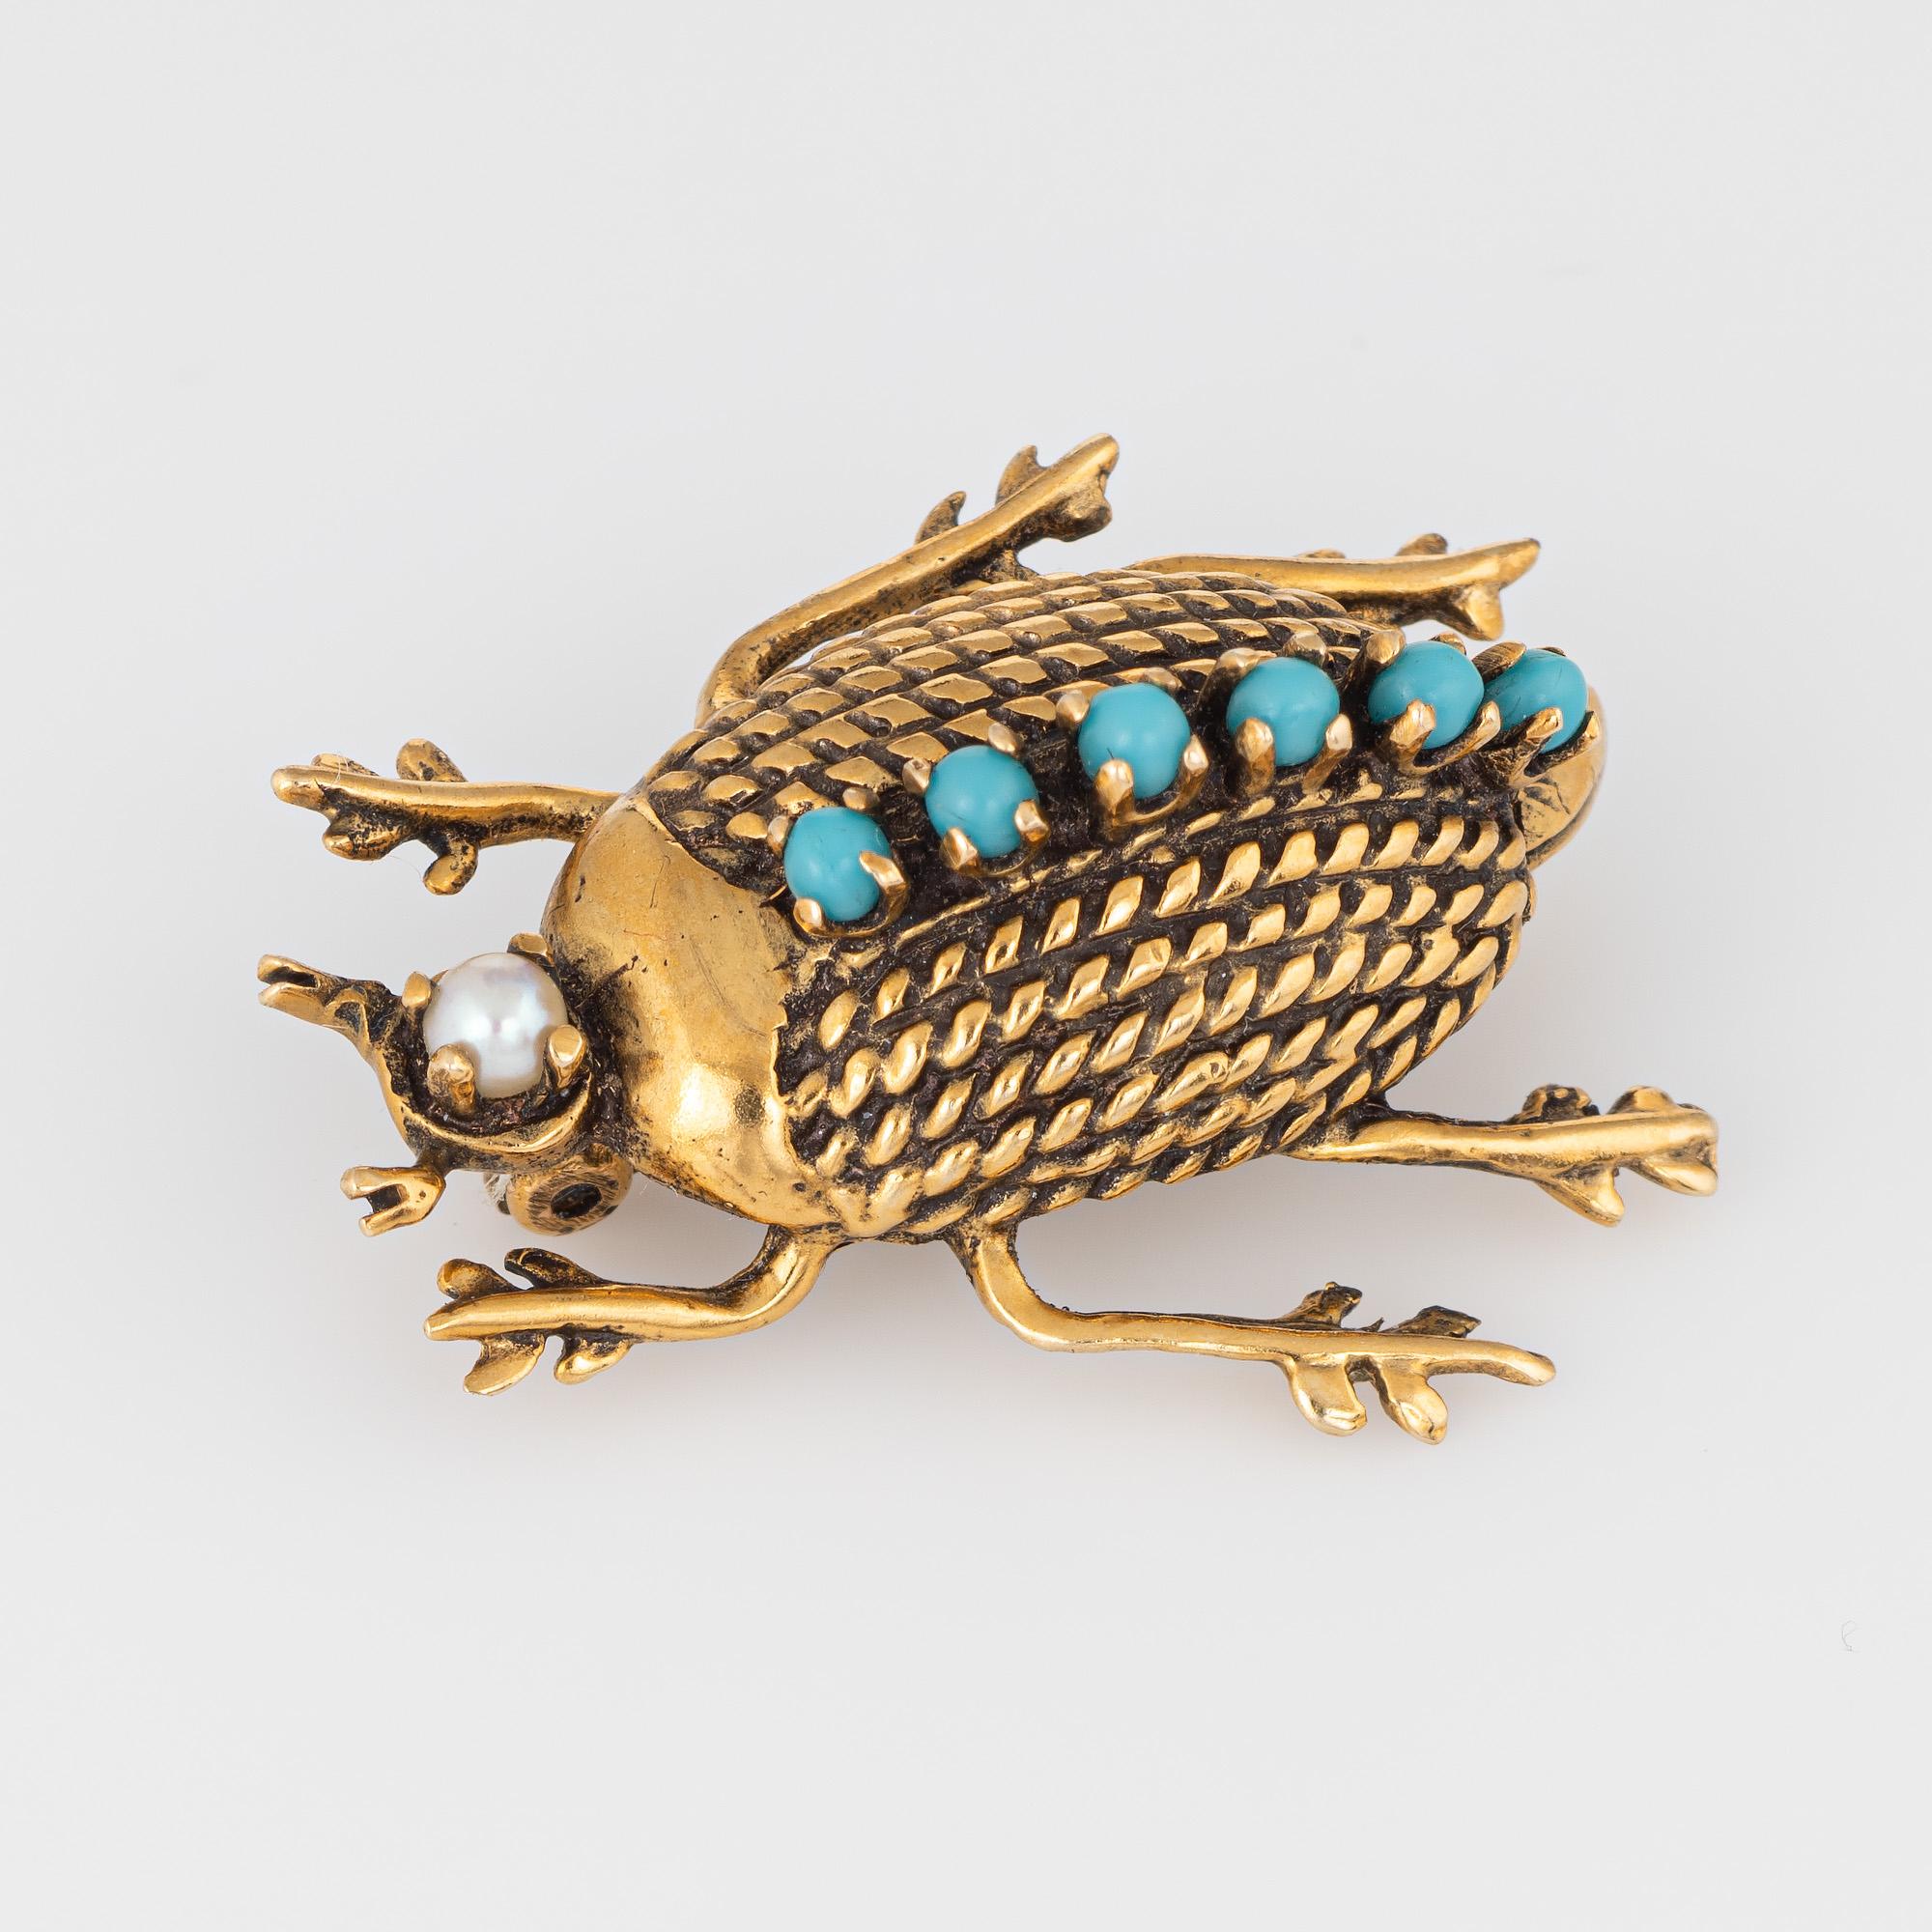 Finely detailed vintage beetle brooch (circa 1950s to 1960s) crafted in 14 karat yellow gold. 

Turquoise cabochons measure 1.5mm each accented with a 2mm cultured pearl. 

The ornate beetle brooch features a rope style design to the center with